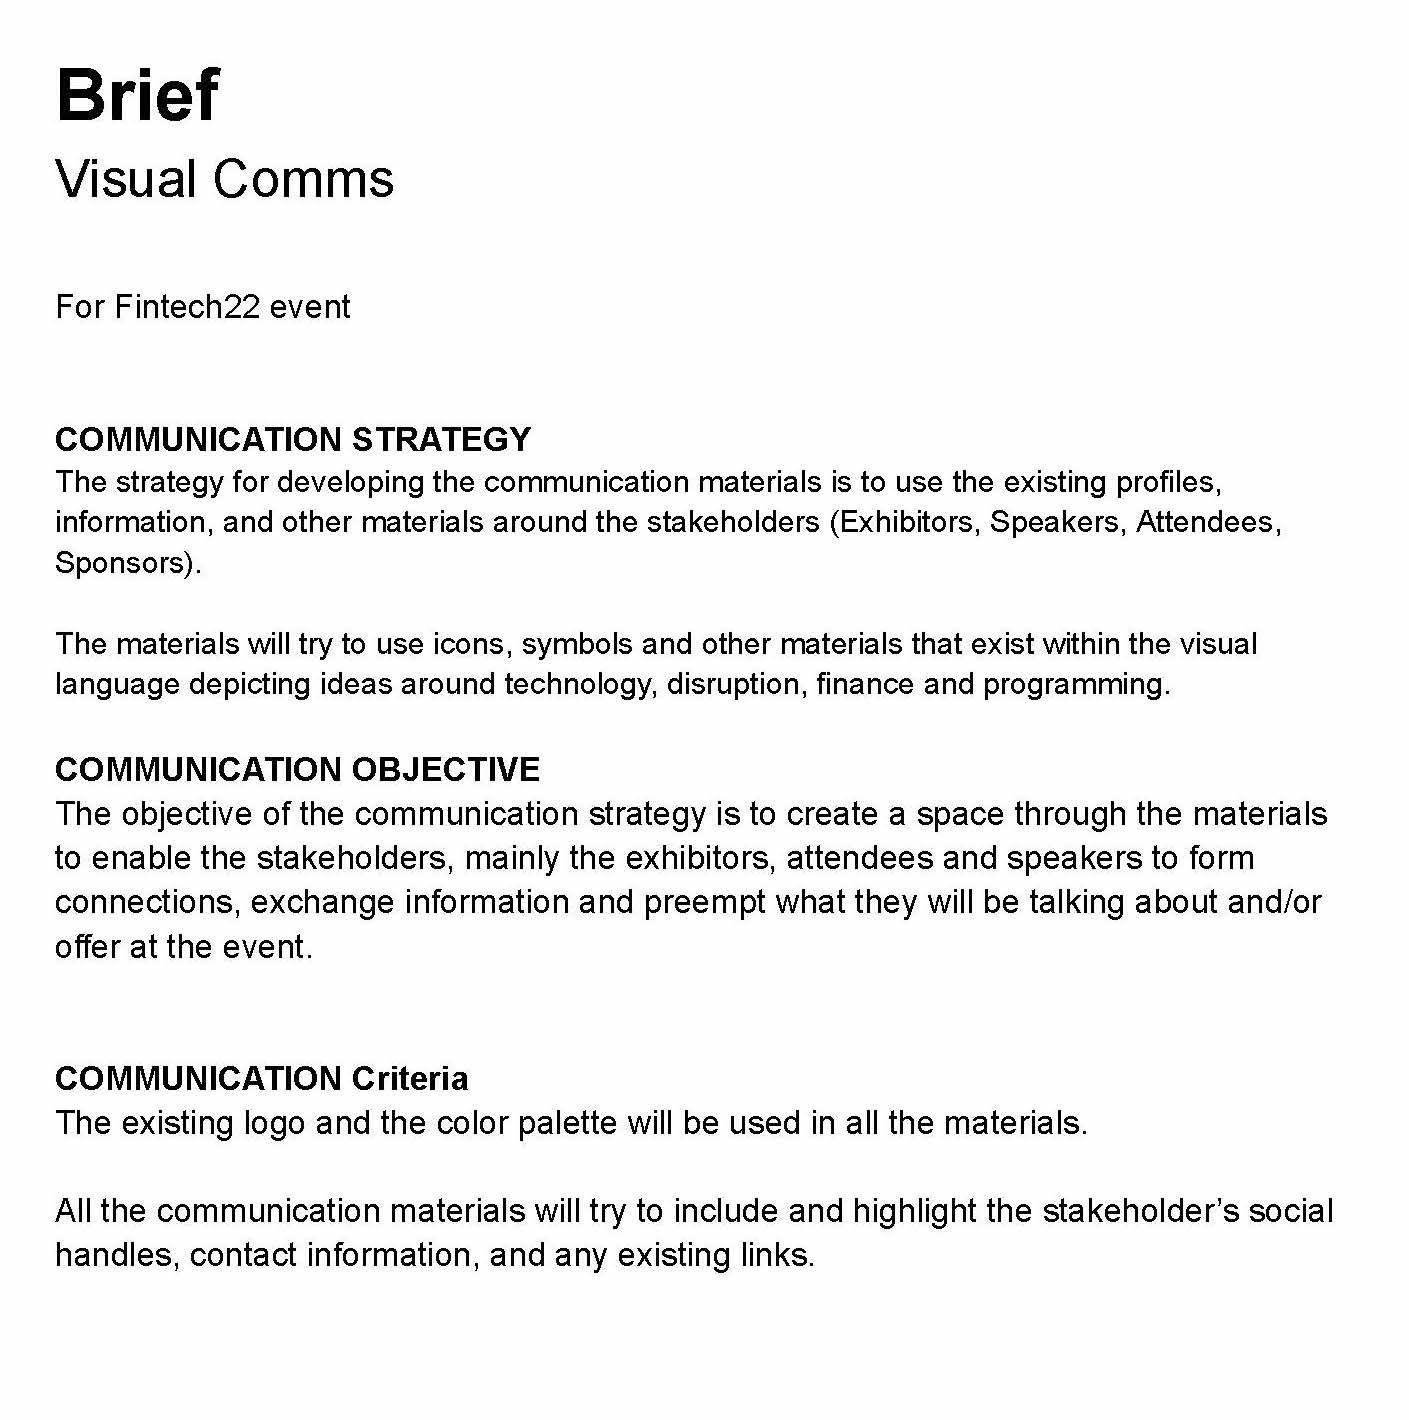 Fintech Comms guide brief_Page_1.jpg